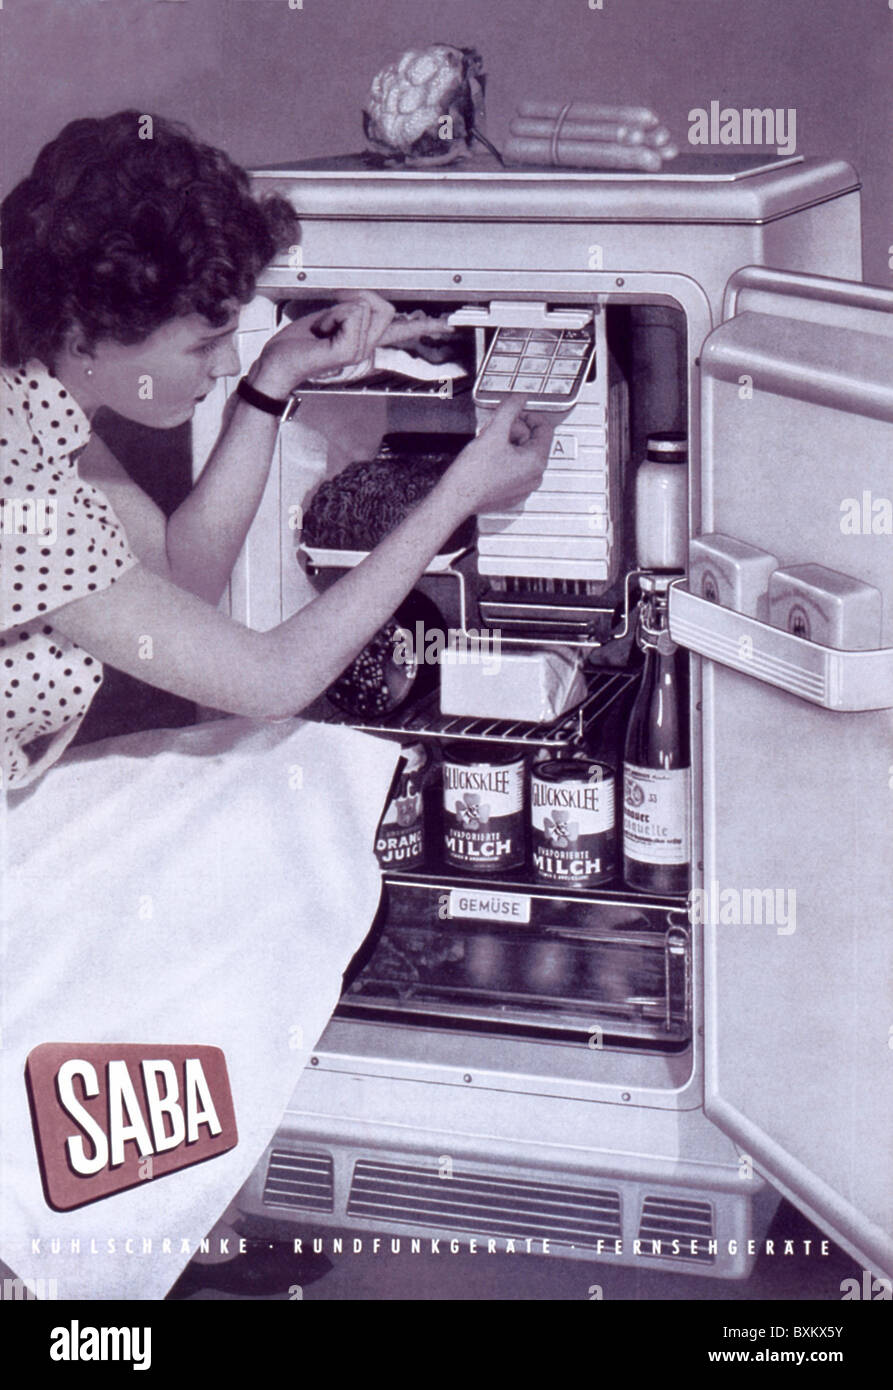 household, kitchen and kitchenware, SABA refrigerator, woman opens fridge, Germany, 1954, Additional-Rights-Clearences-Not Available Stock Photo